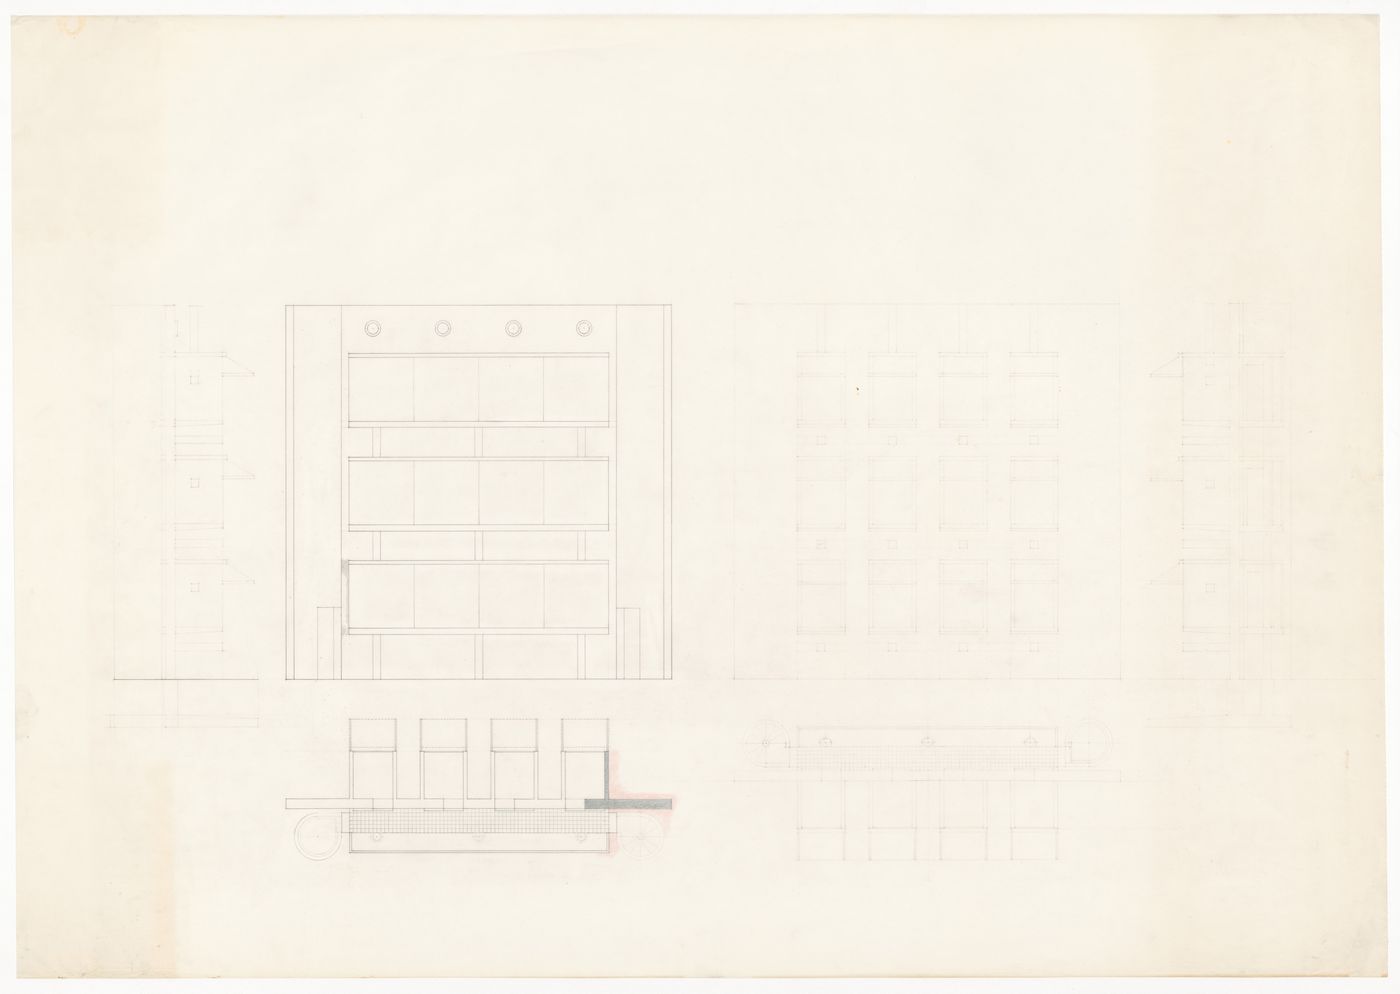 Elevations and roof plans for The House for the Inhabitant who Refused to Participate